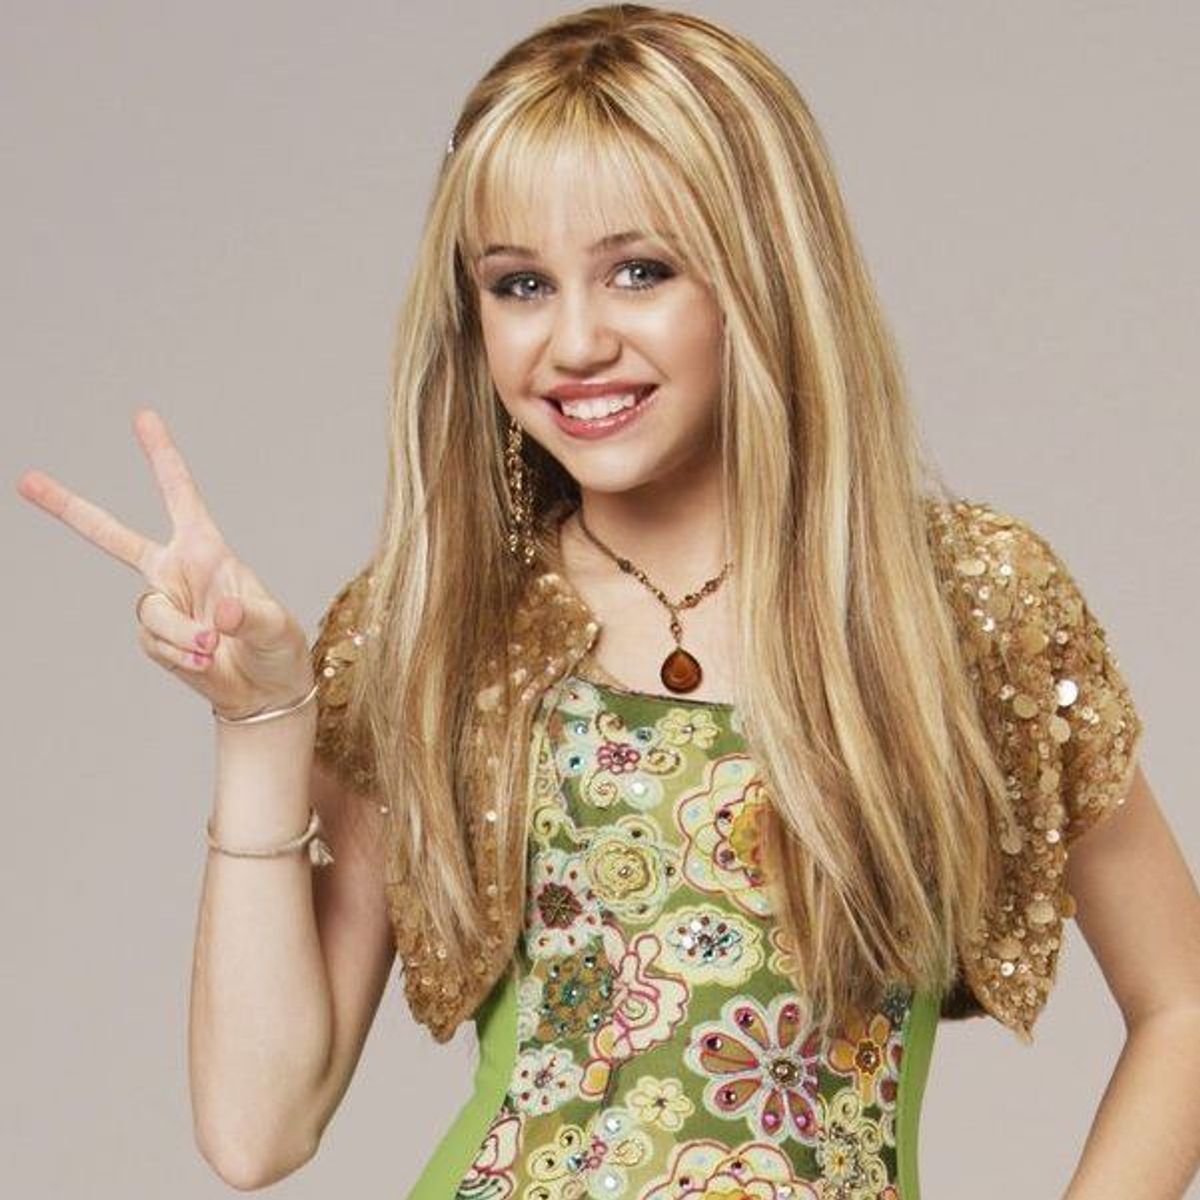 14 Signs You Grew Up In The 2000s